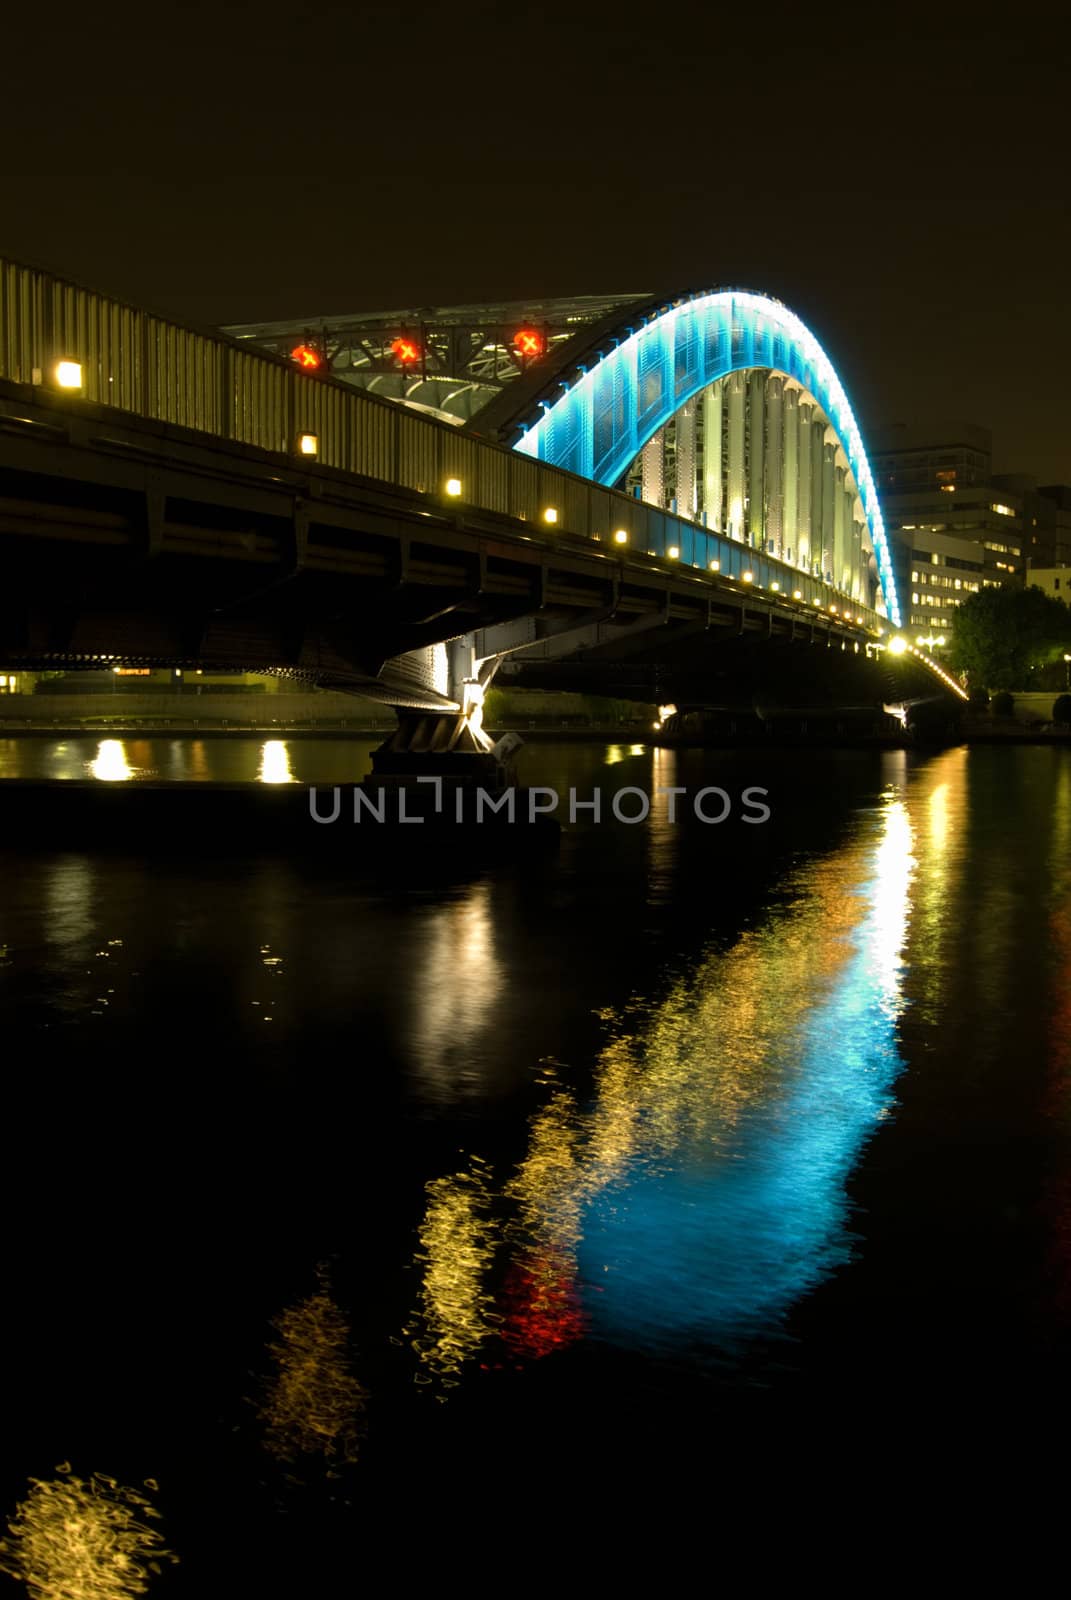 night iron-bridge and reflection in river